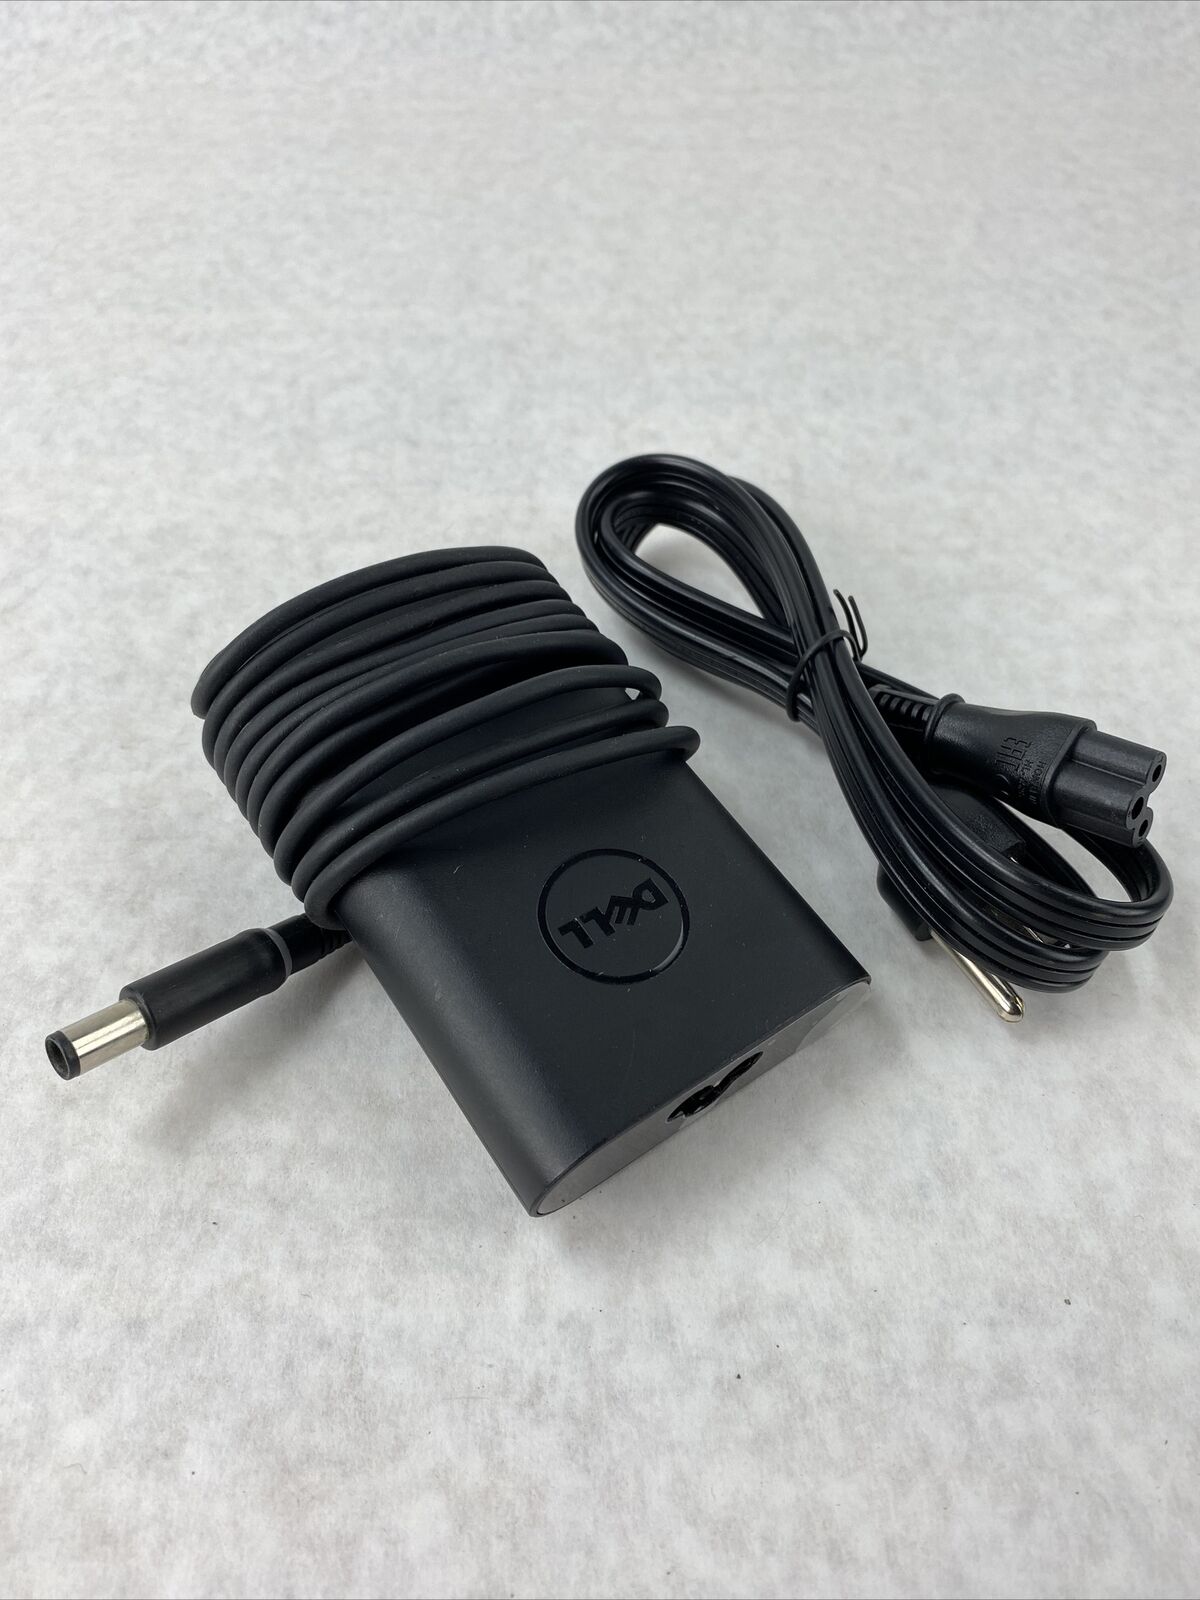 Lot of 16 Dell 6TFFF 65W 19.5V 3.34A AC Power Adapter HA65NM130